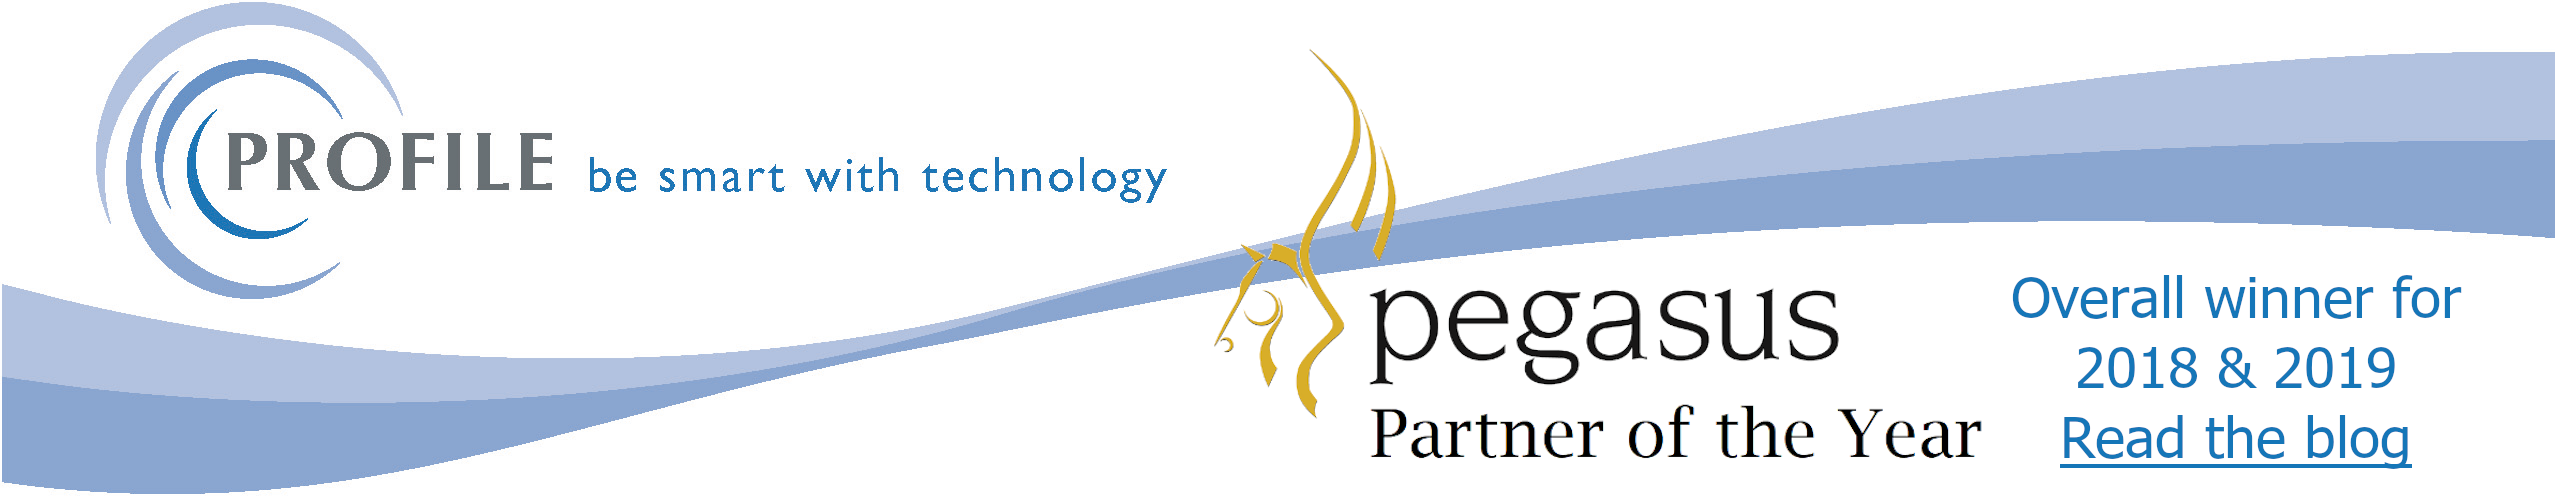 Partner of the Year banner